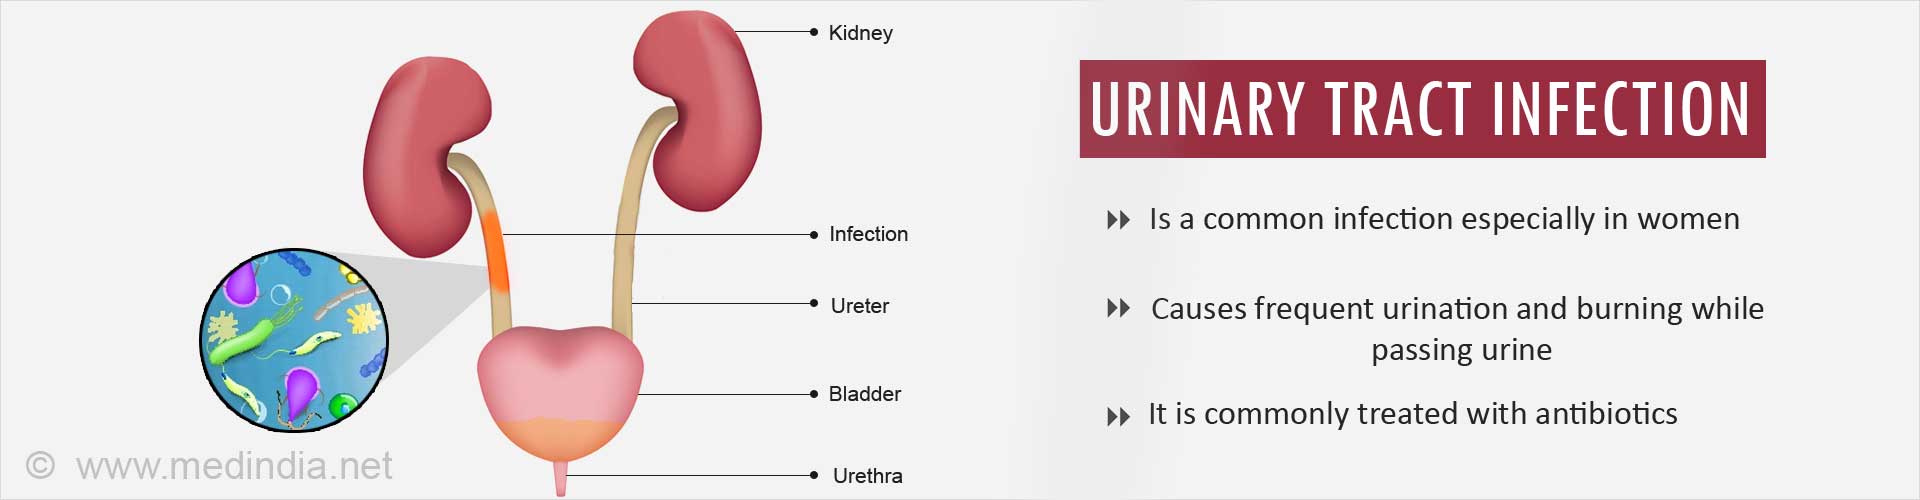 Urinary Tract Infection
- It is a common infection especially in women
- Causes frequent urination and burning while passing urine
- It is commonly treated with antibiotics